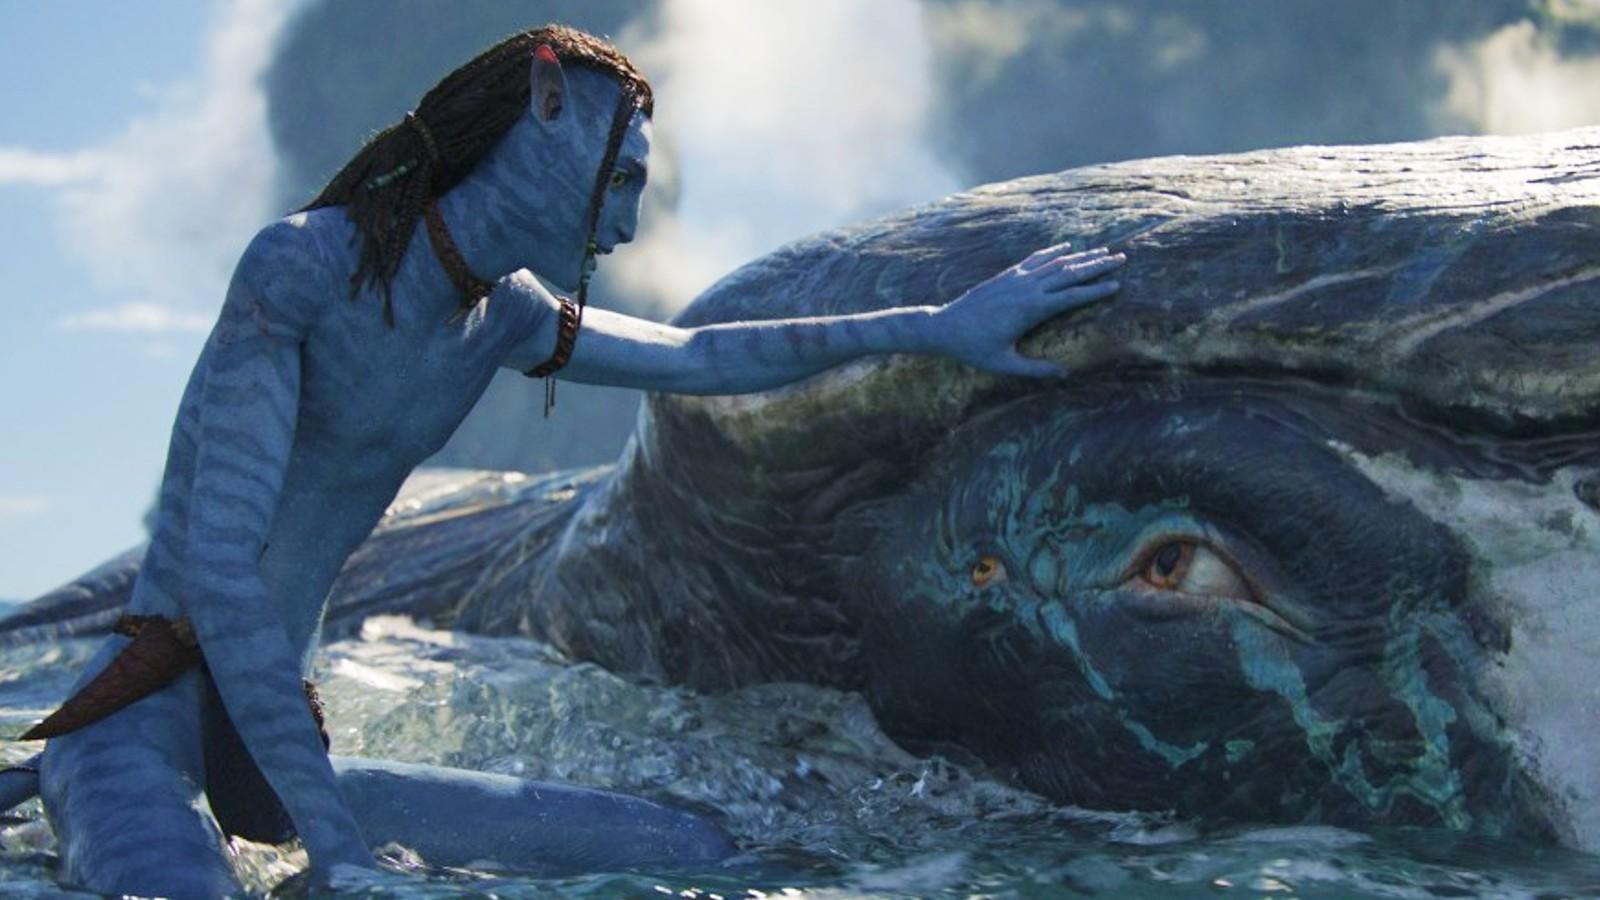 A Tulkun whale, the source of Amrita, in Avatar 2